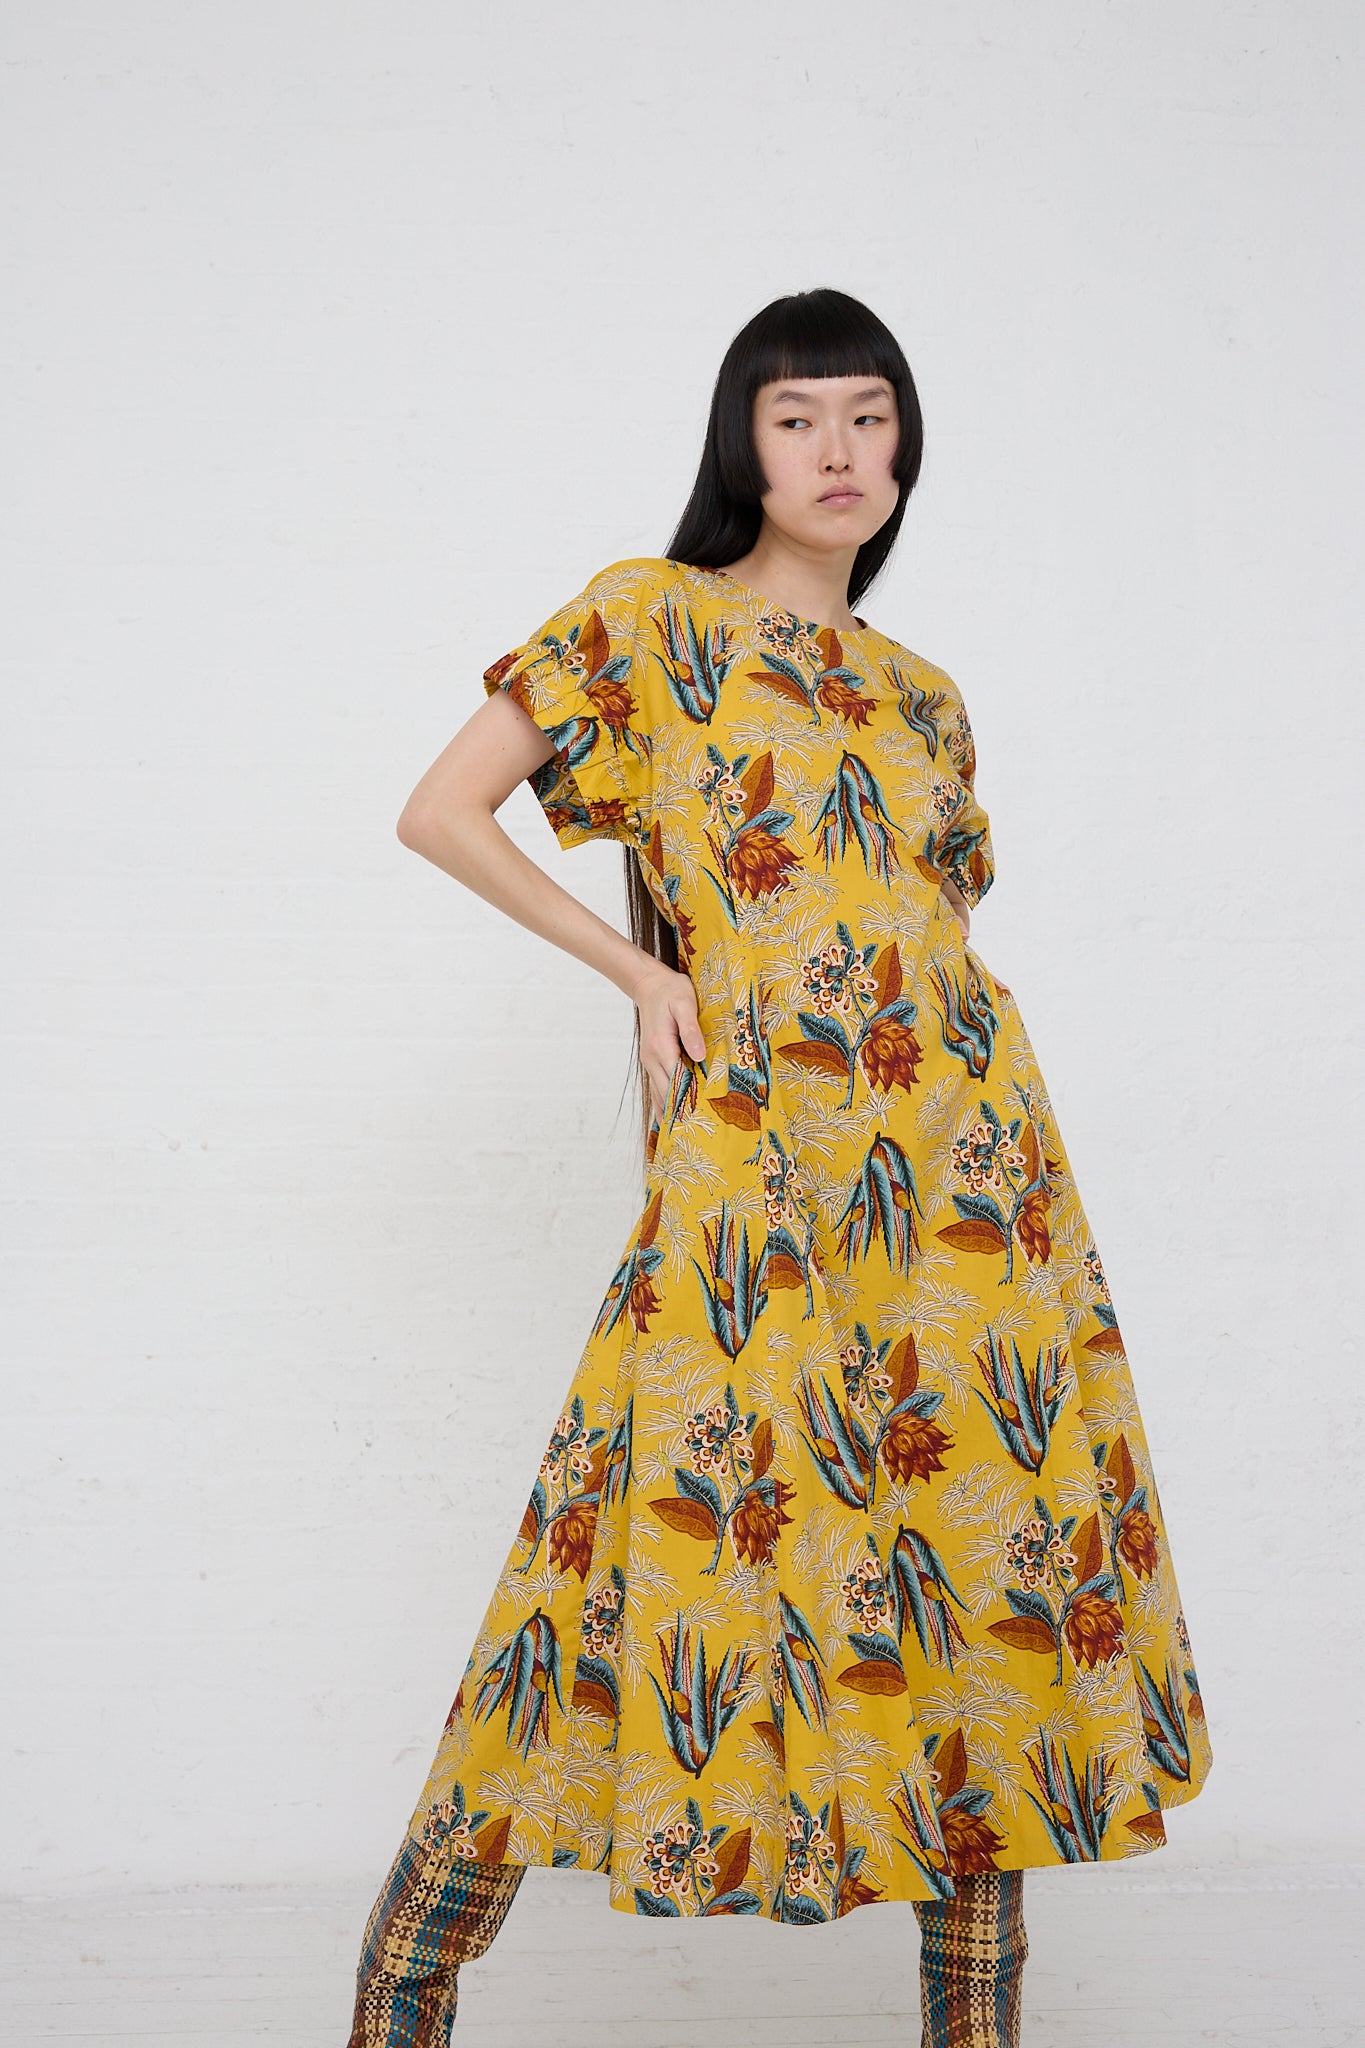 A woman in a Ulla Johnson Devon Dress in Marigold posing in front of a white wall.